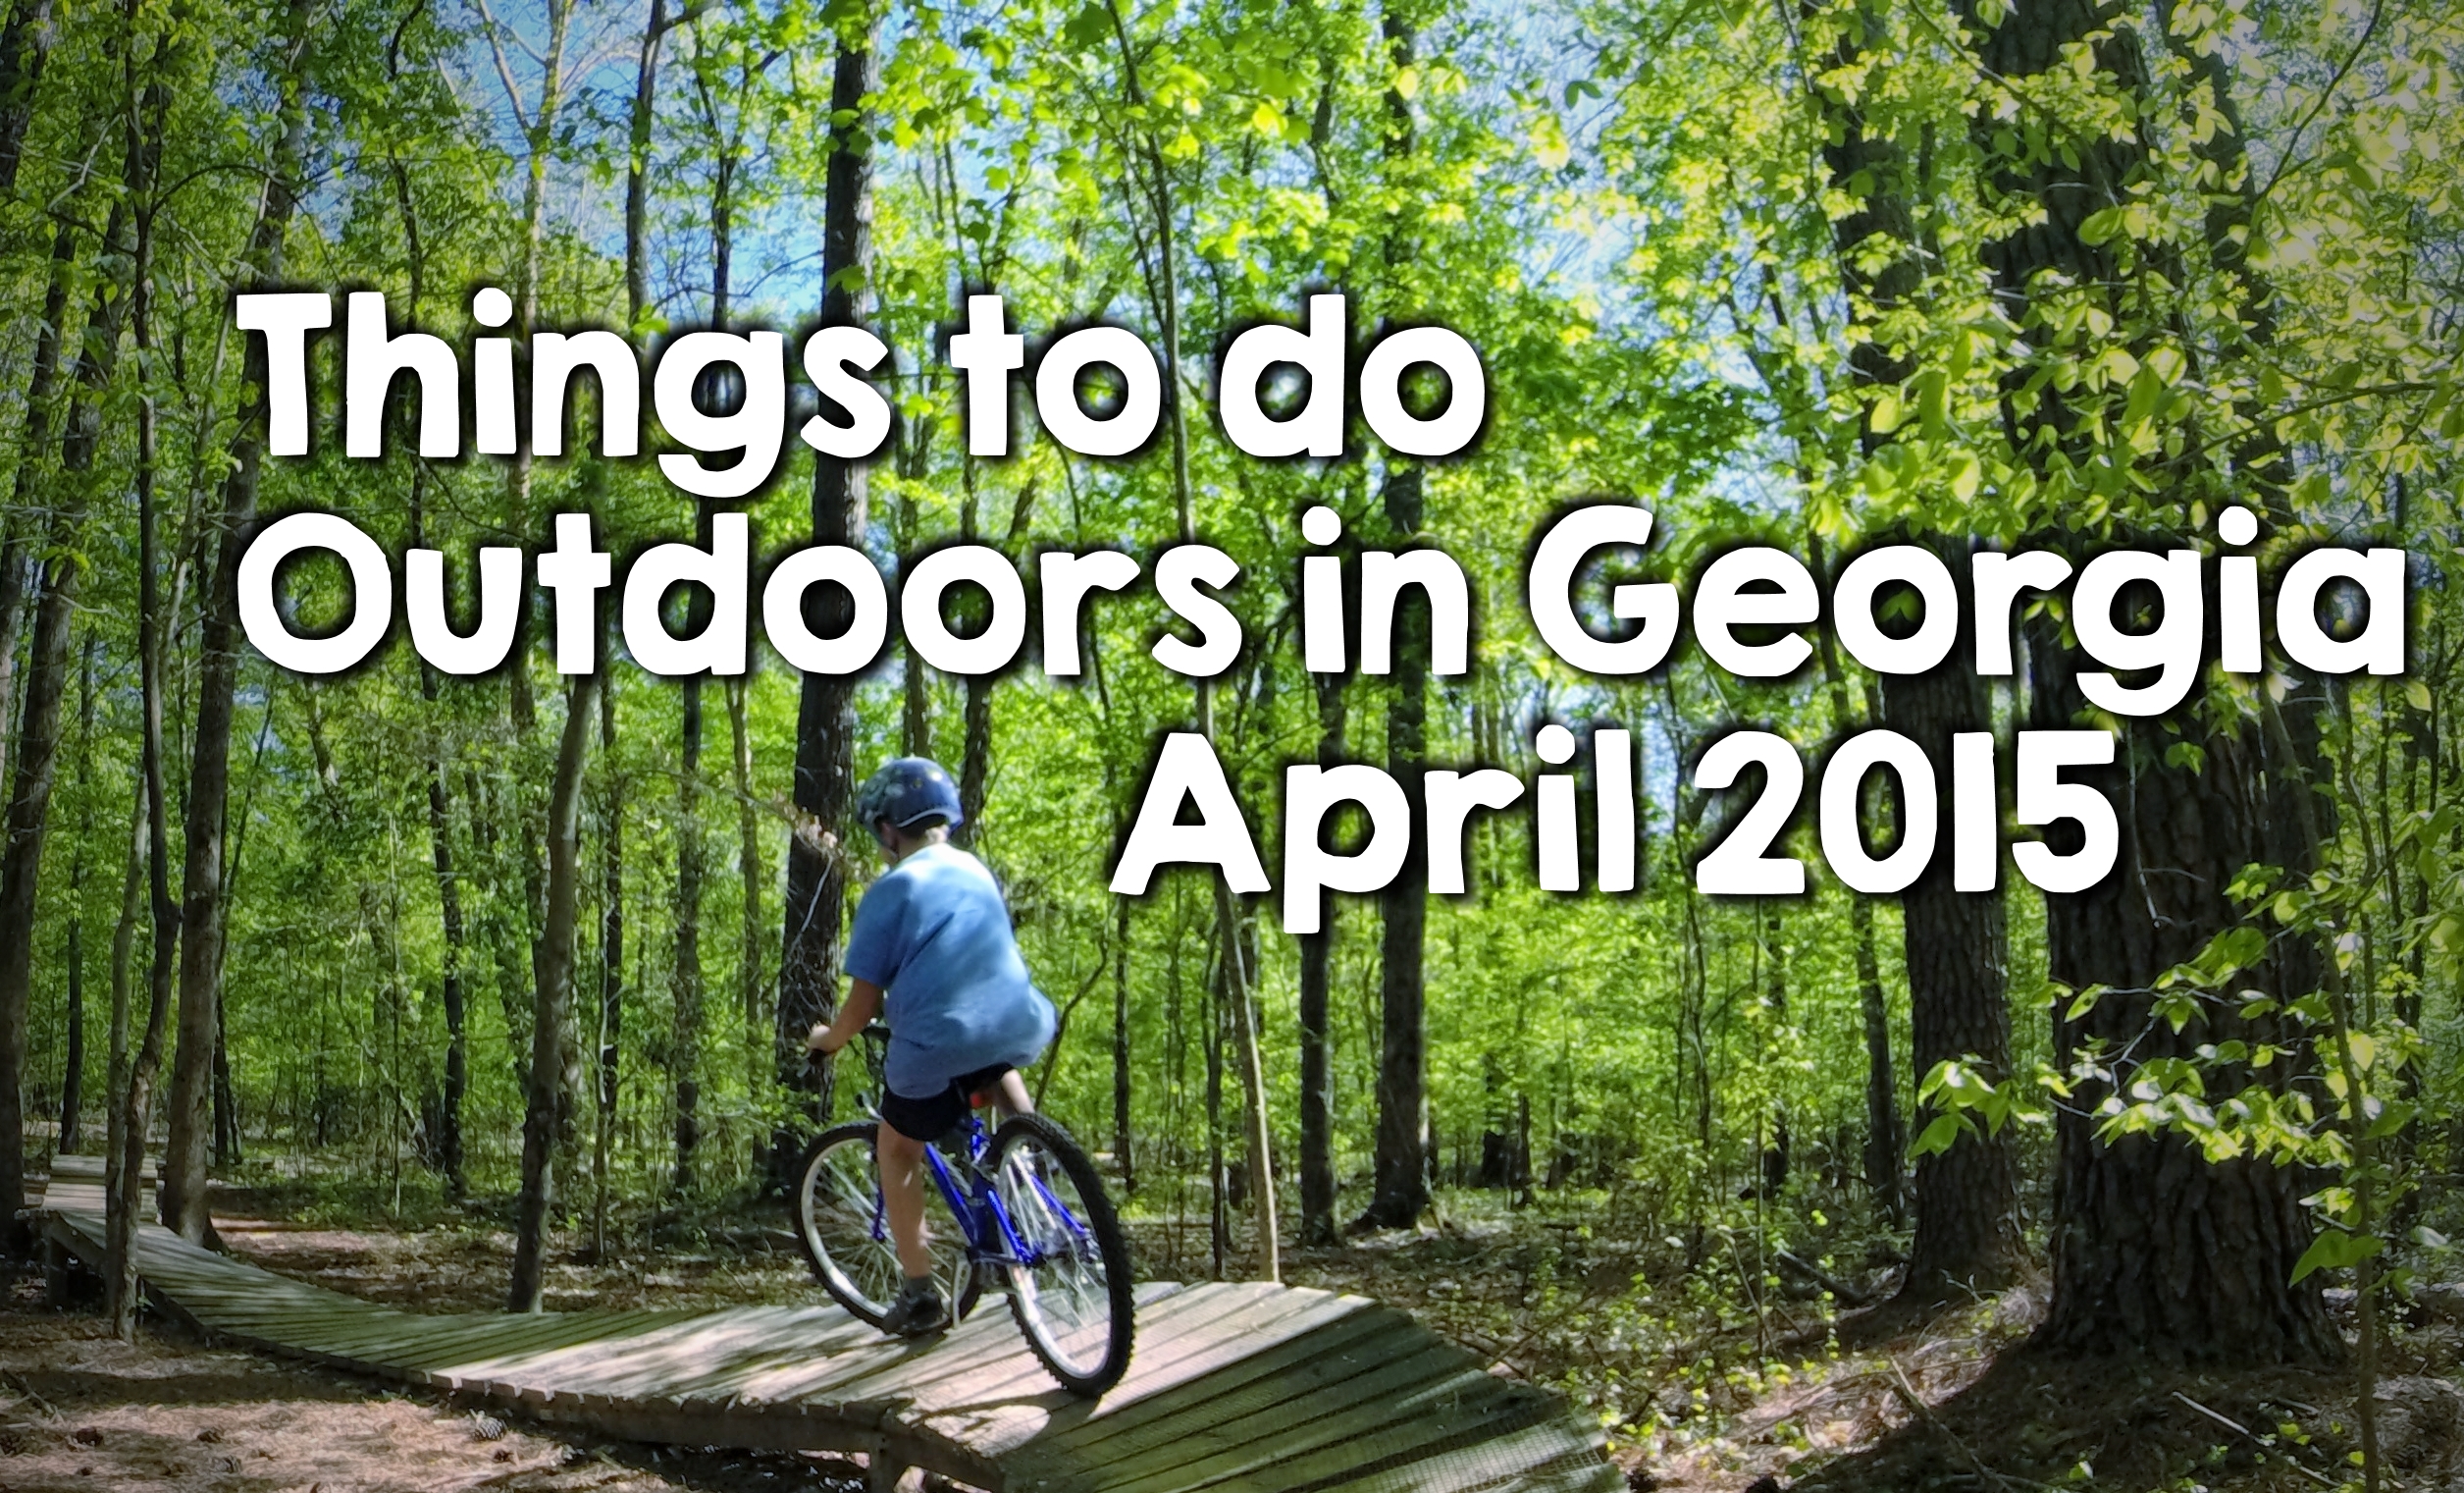 Things to do outdoors in Georgia April 2015